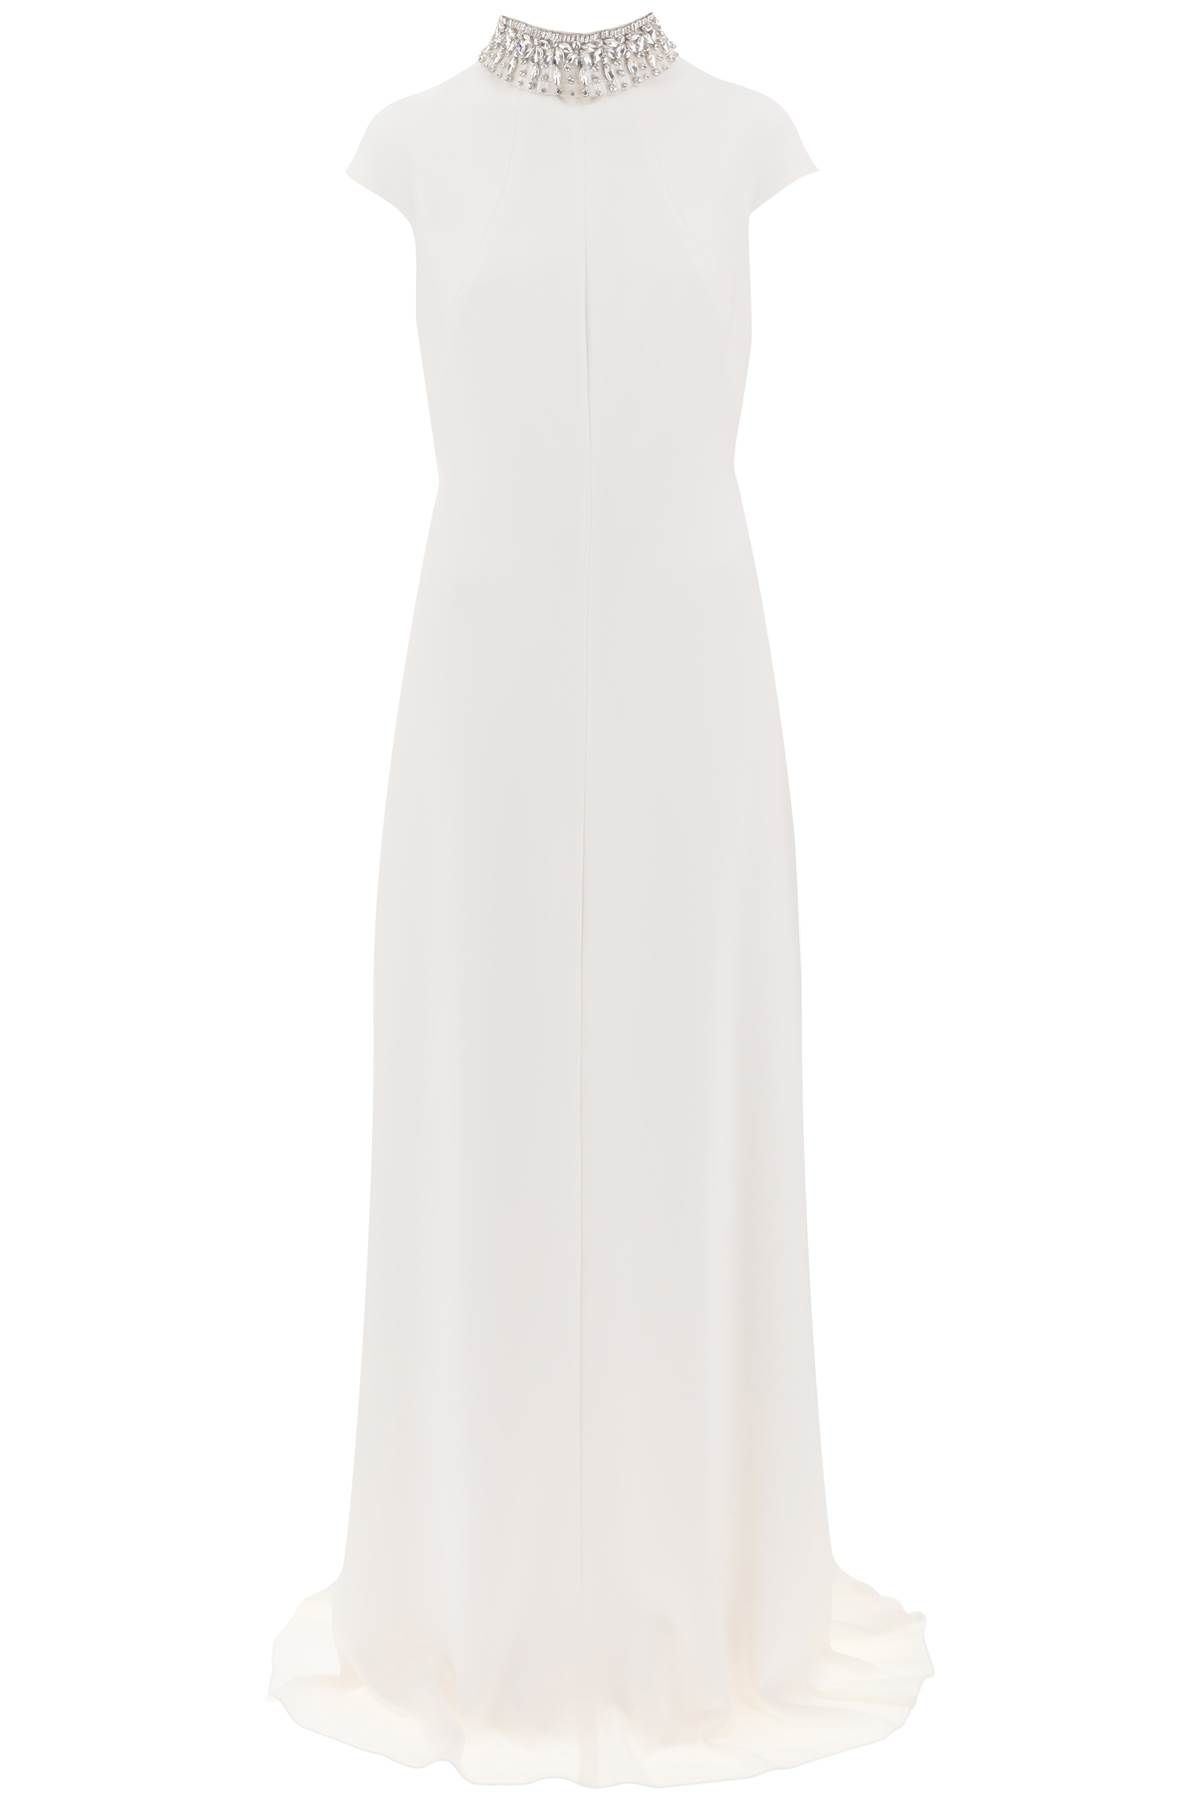 MAX MARA 'PERIM' MAXI DRESS IN CADY WITH NECKLACE